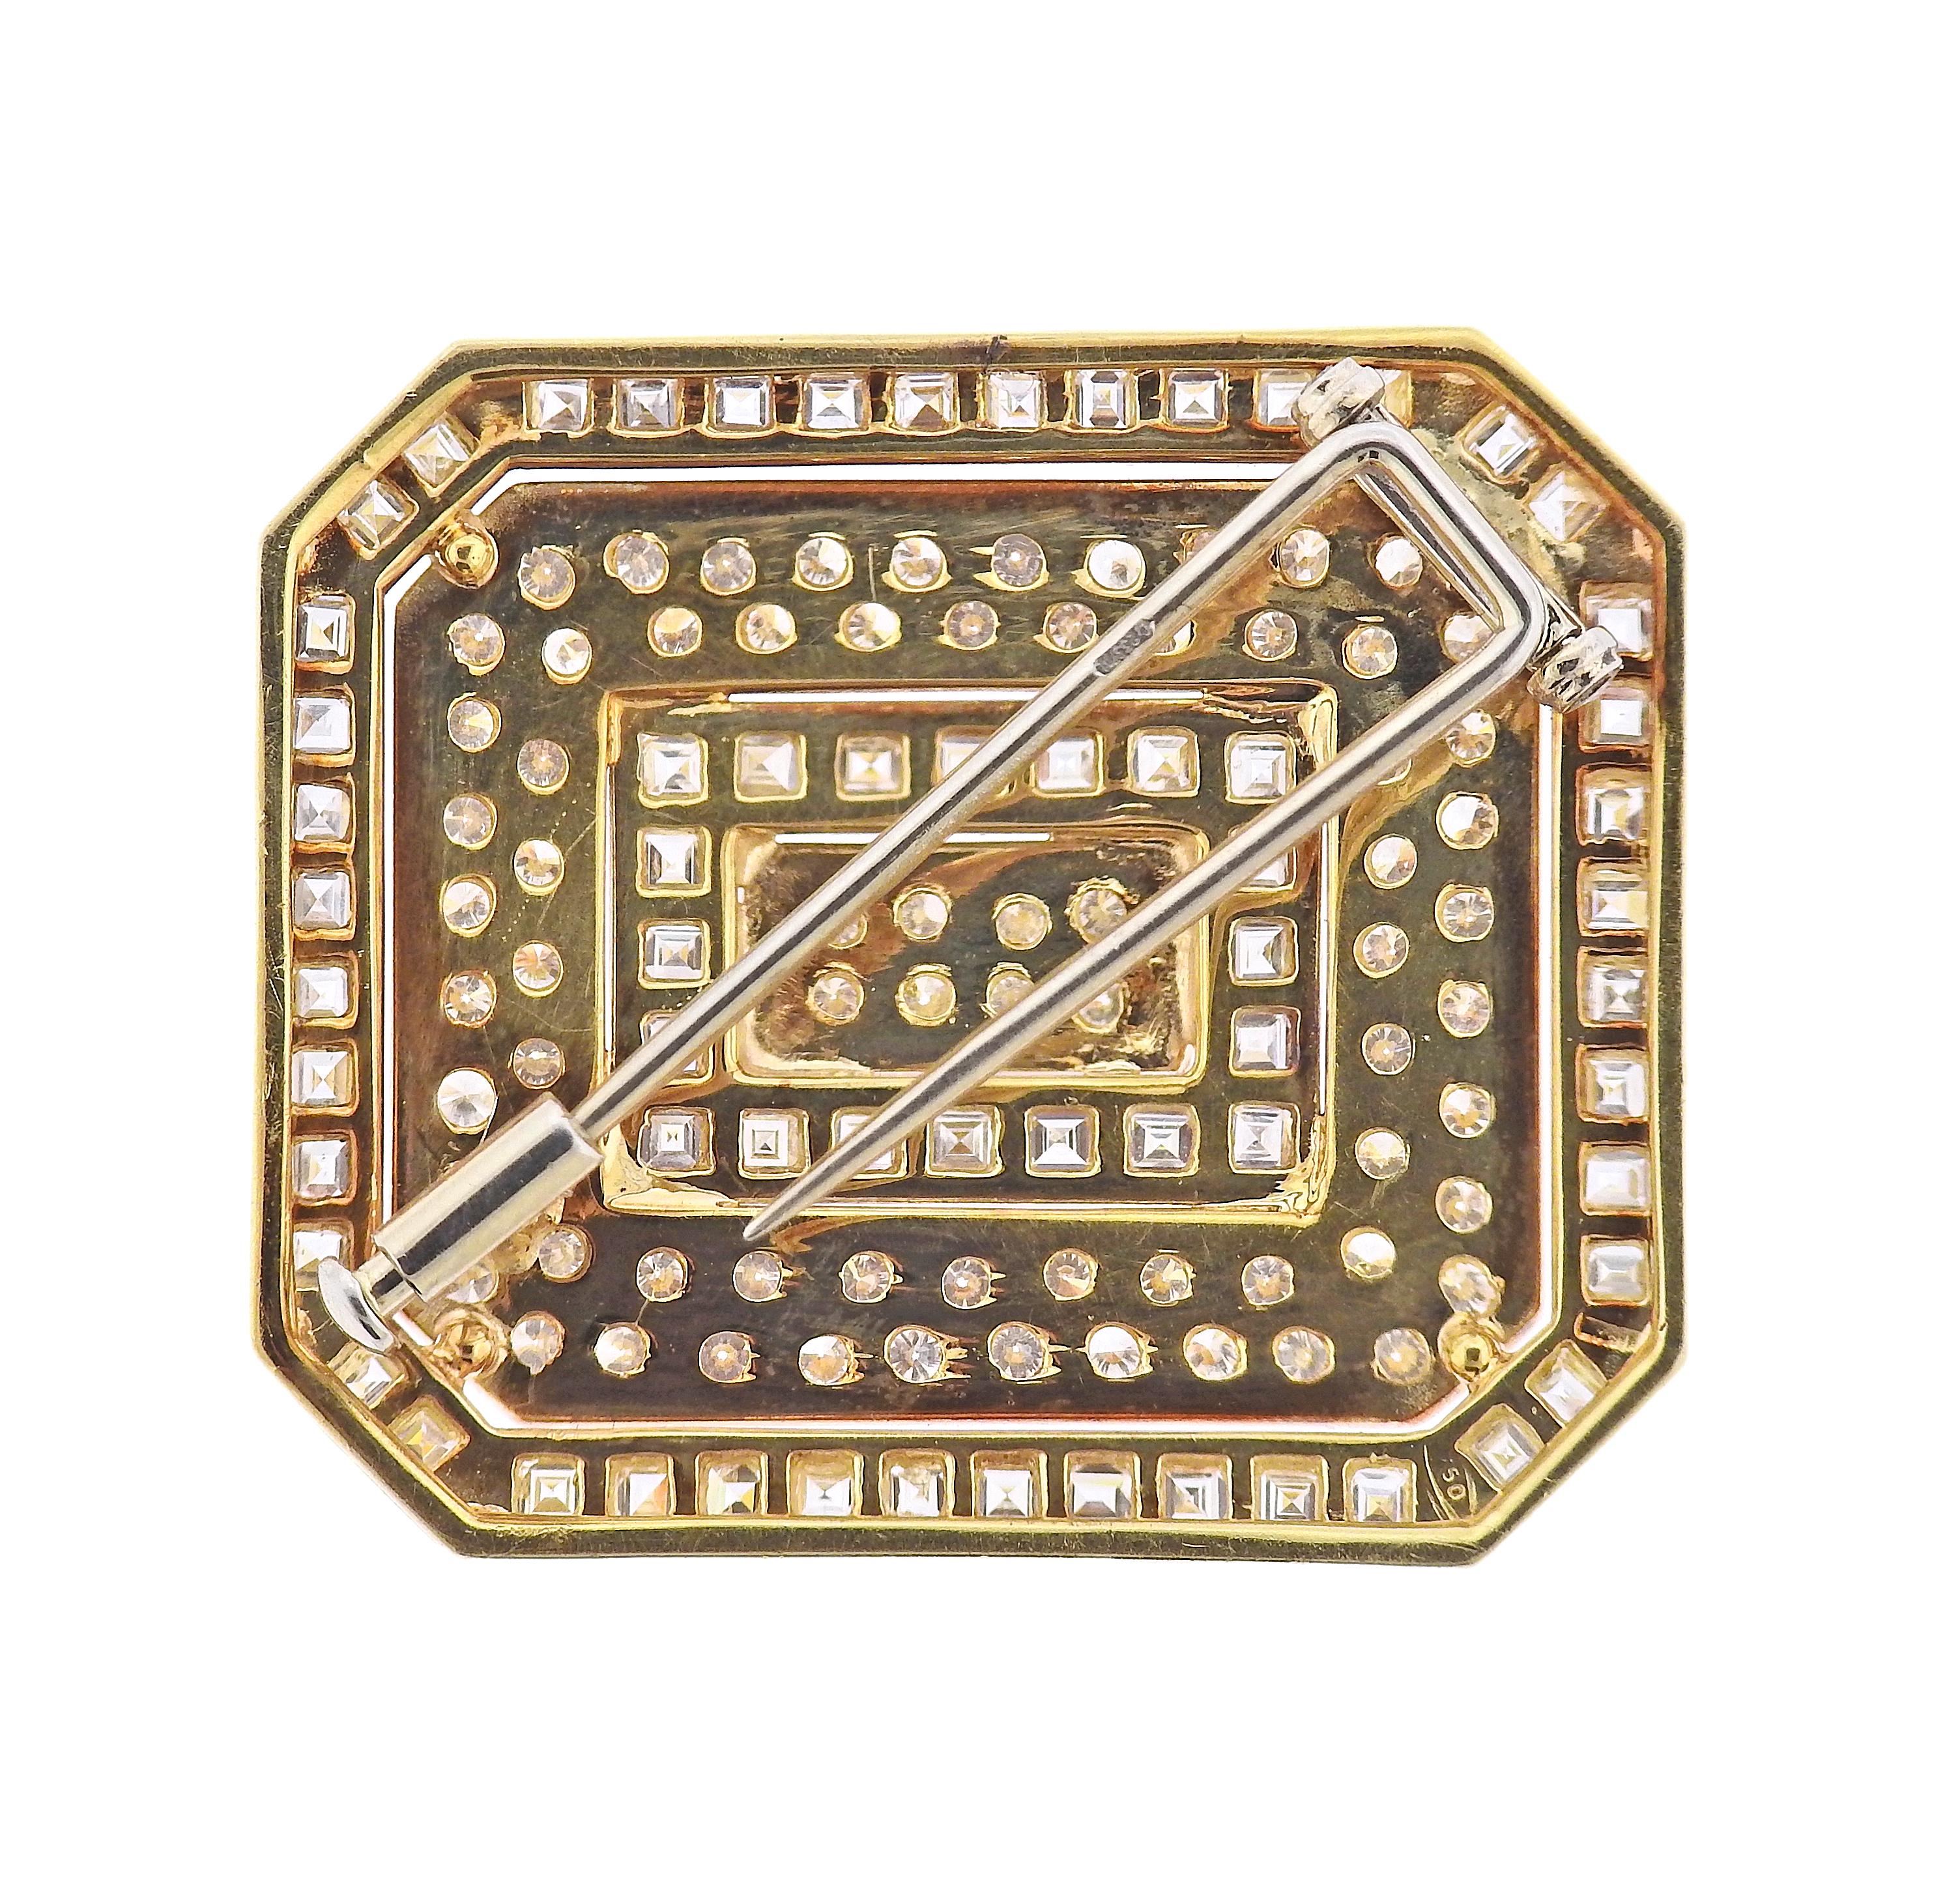 18k gold brooch by Bvlgari, with approx. 2.50ctw in diamonds. Brooch measures 34mm x 29mm. Marked: Bvlgari, 750, Italian mark. Weight - 17 grams. 